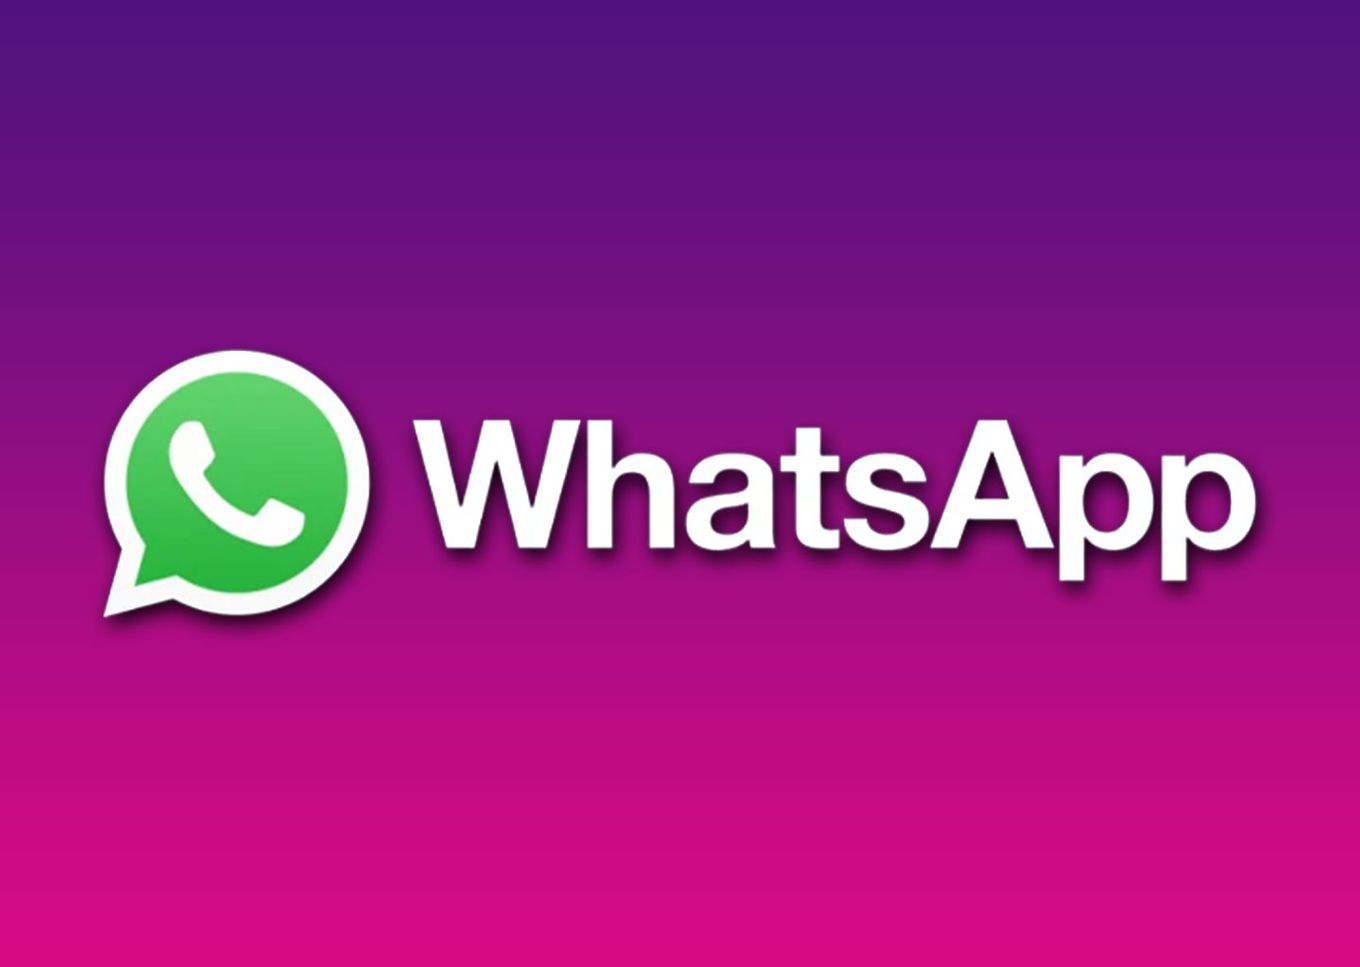 Alternative Messaging App For iOS and Android - WhatsApp